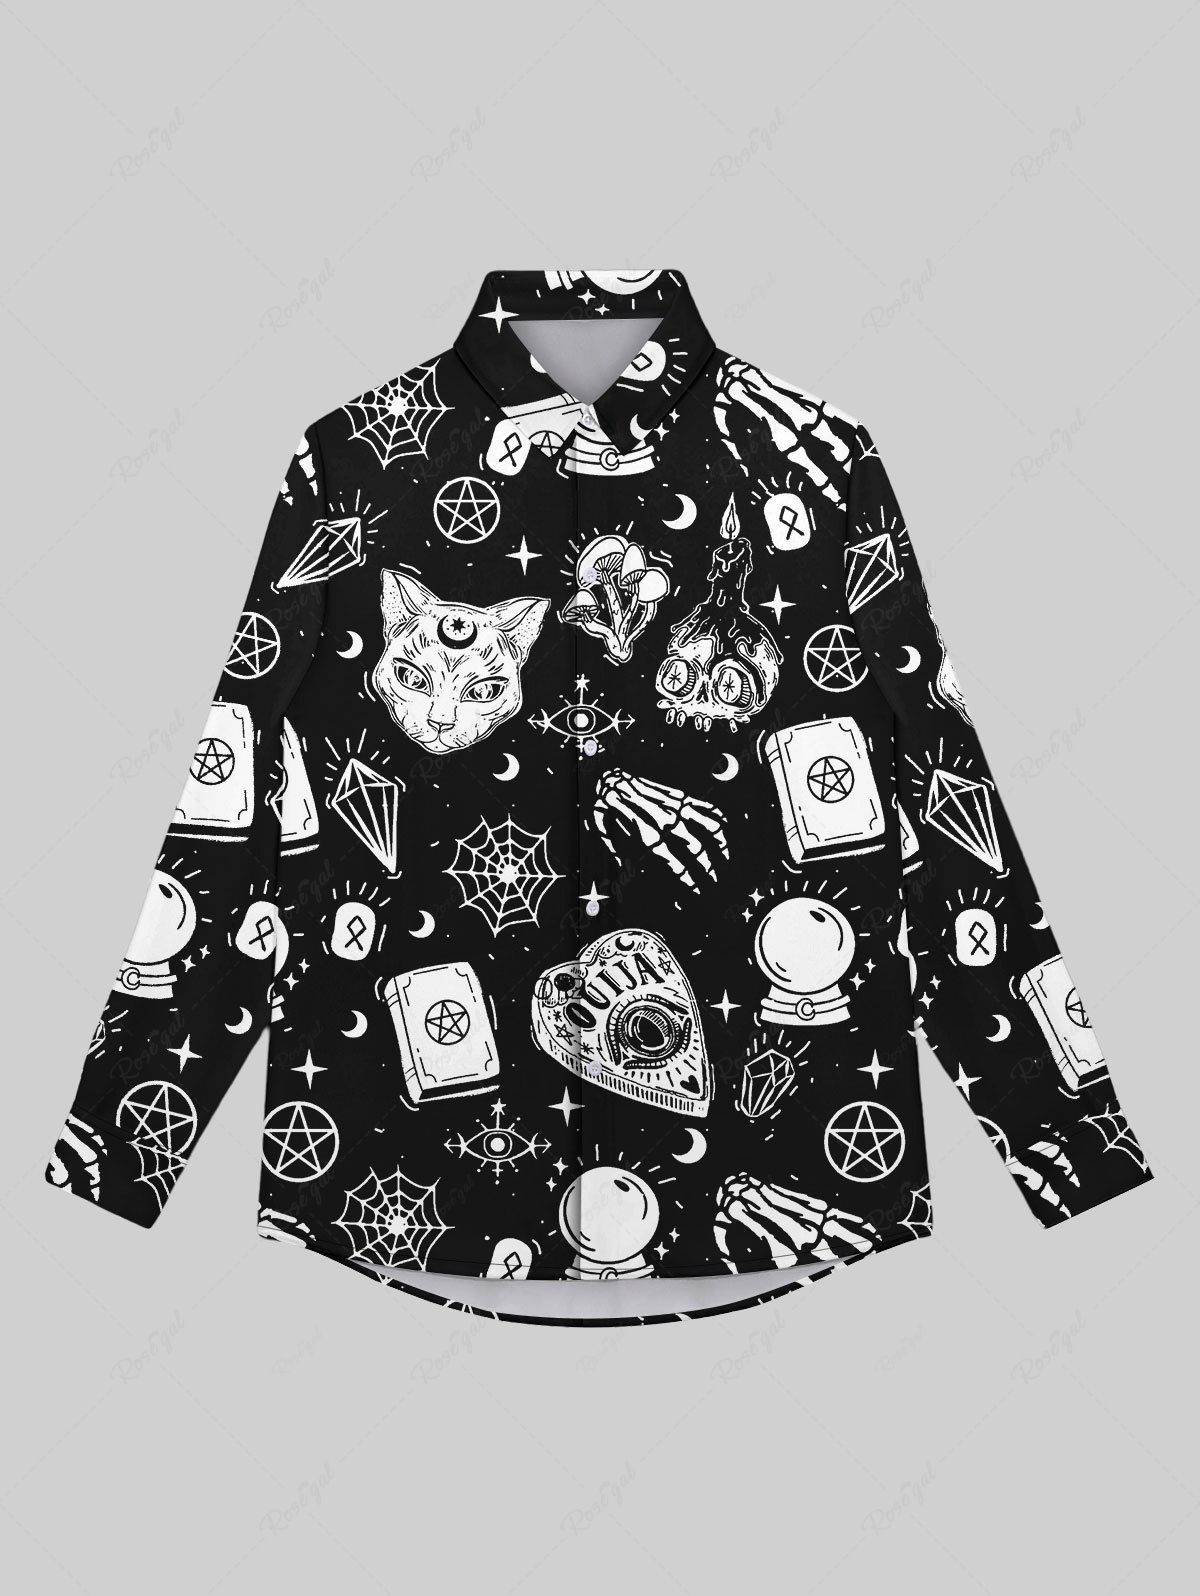 Unique Gothic Galaxy Moon Star Spider Web Skulls Candle Flame Cat Print Button Down Shirt For Men  